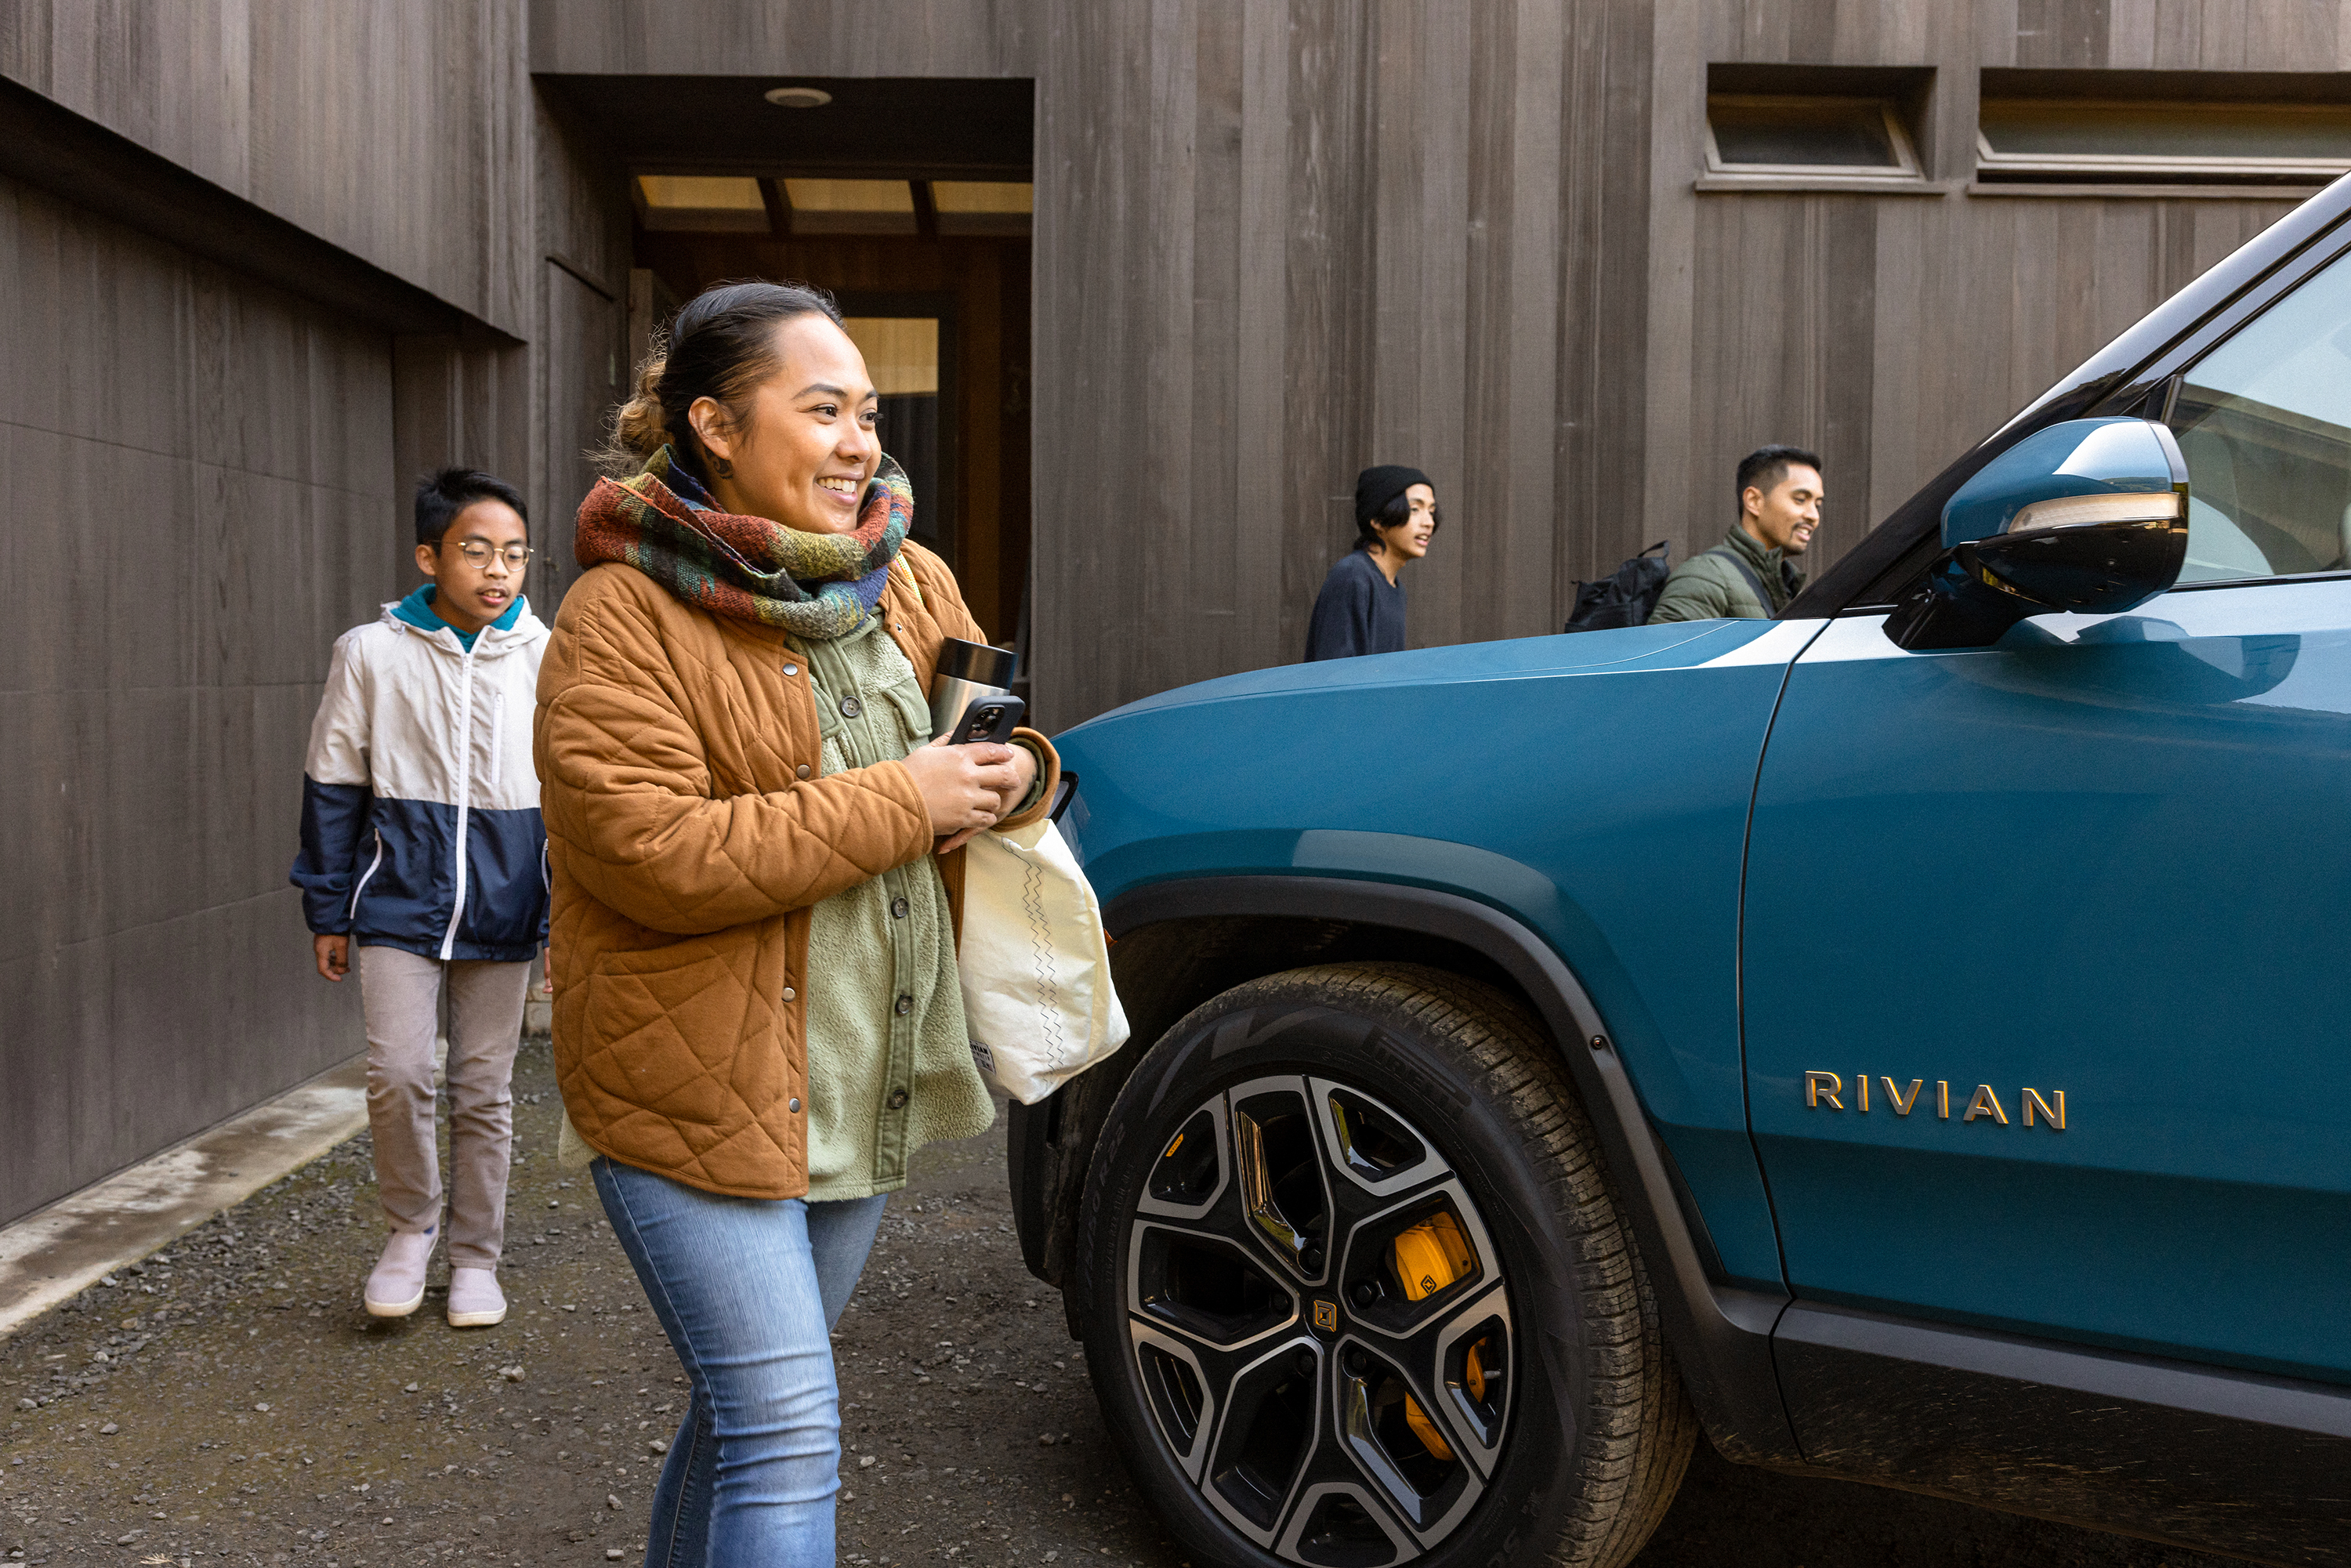 Advanced Security Measures - Rivian's Use of BLE Technology Ensures Vehicle Owners' Protection